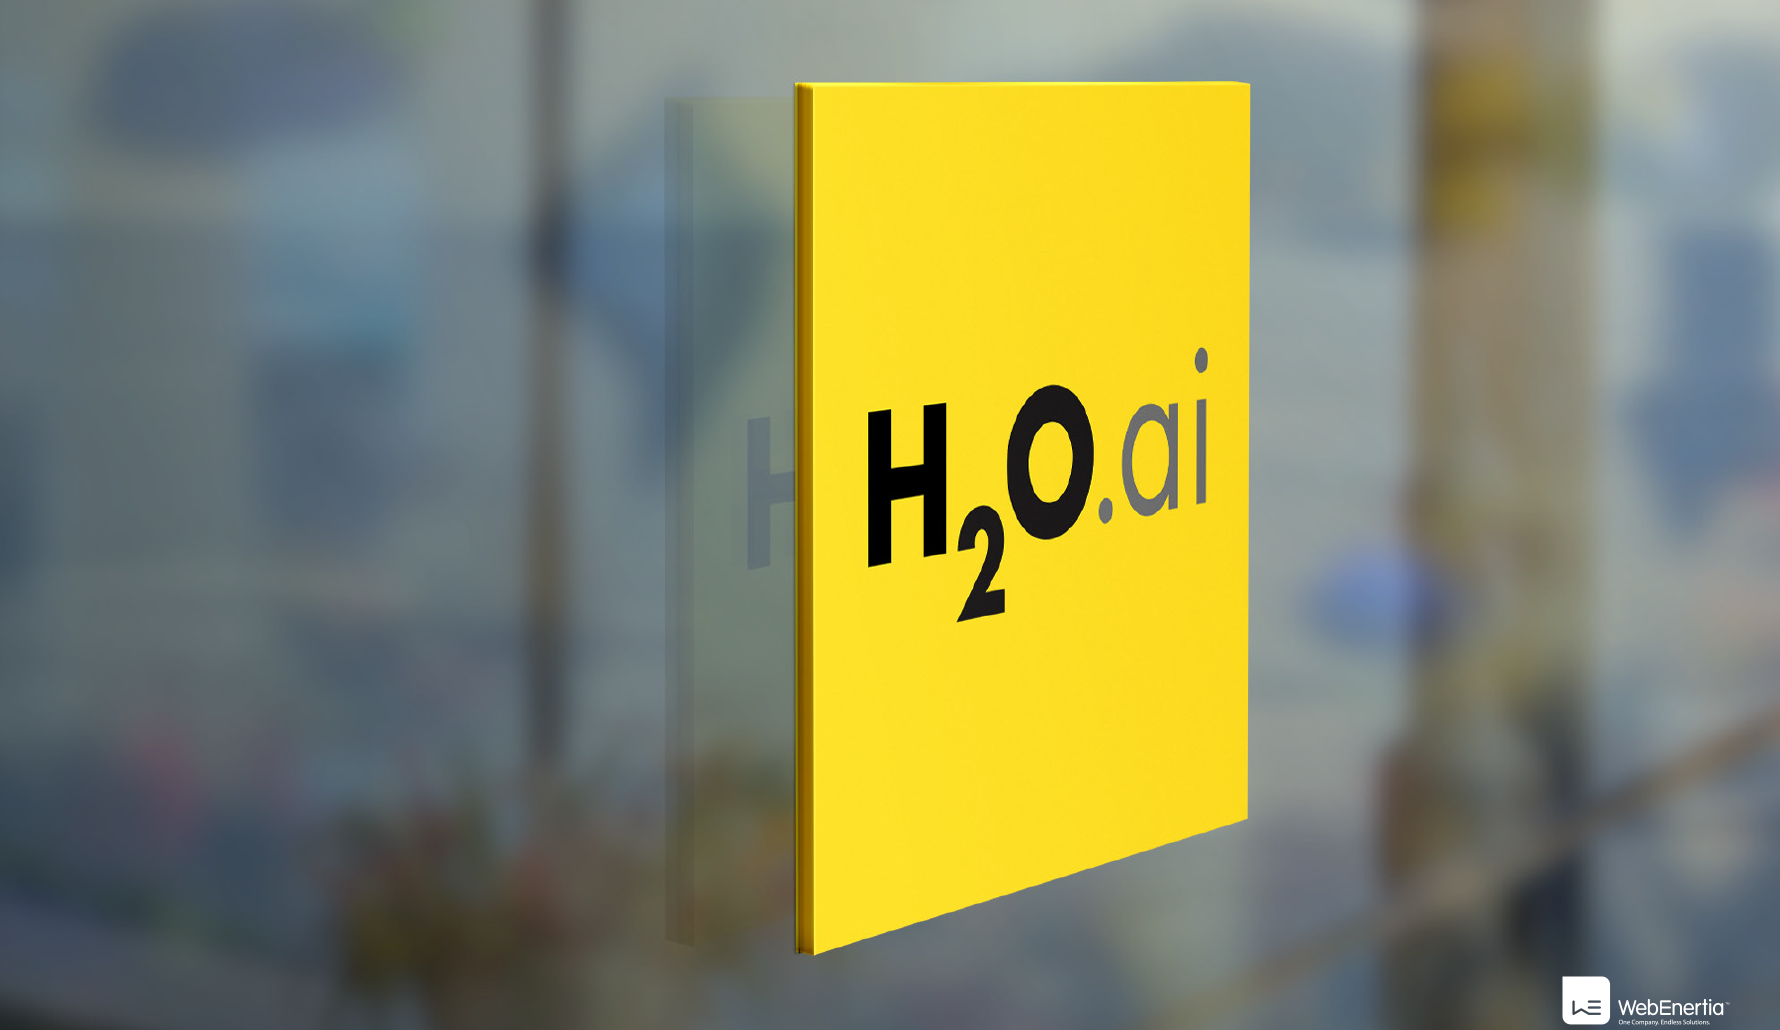 H2O.ai Brand Update & Guidelines square logo